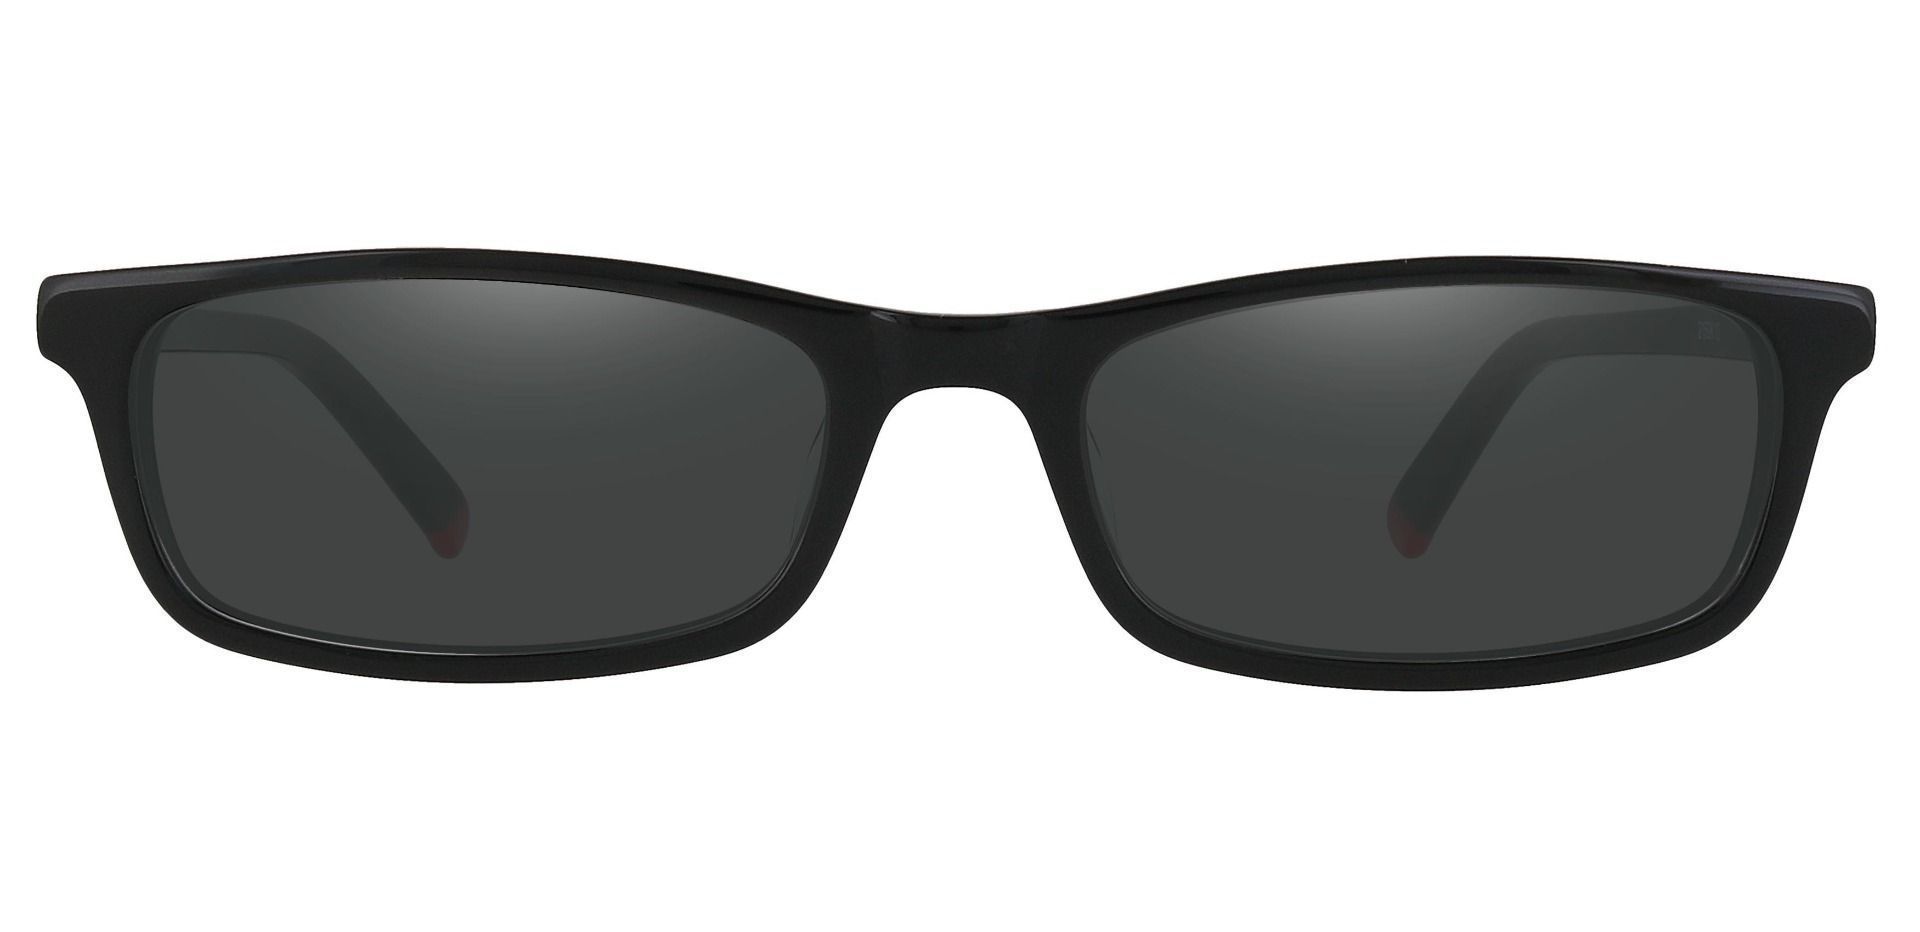 Palisades Rectangle Single Vision Sunglasses - Black Frame With Gray Lenses